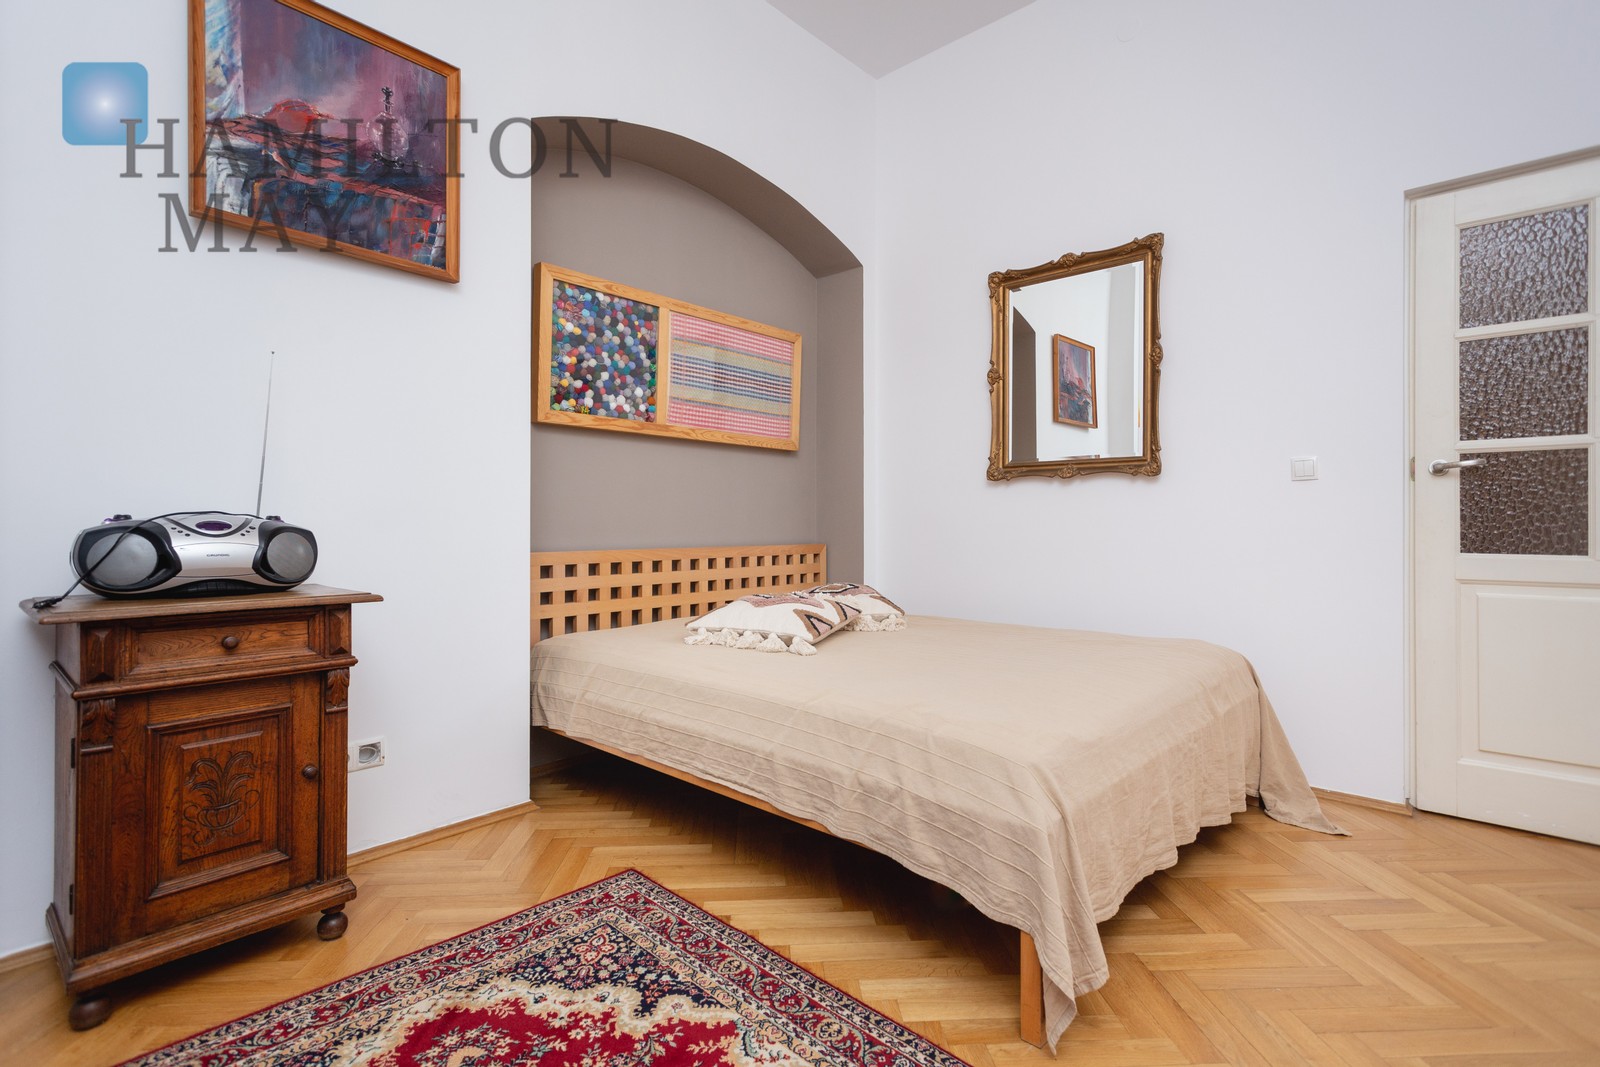 A quiet and spacious one bedroom apartment in the heart of Kazimierz Krakow for rent